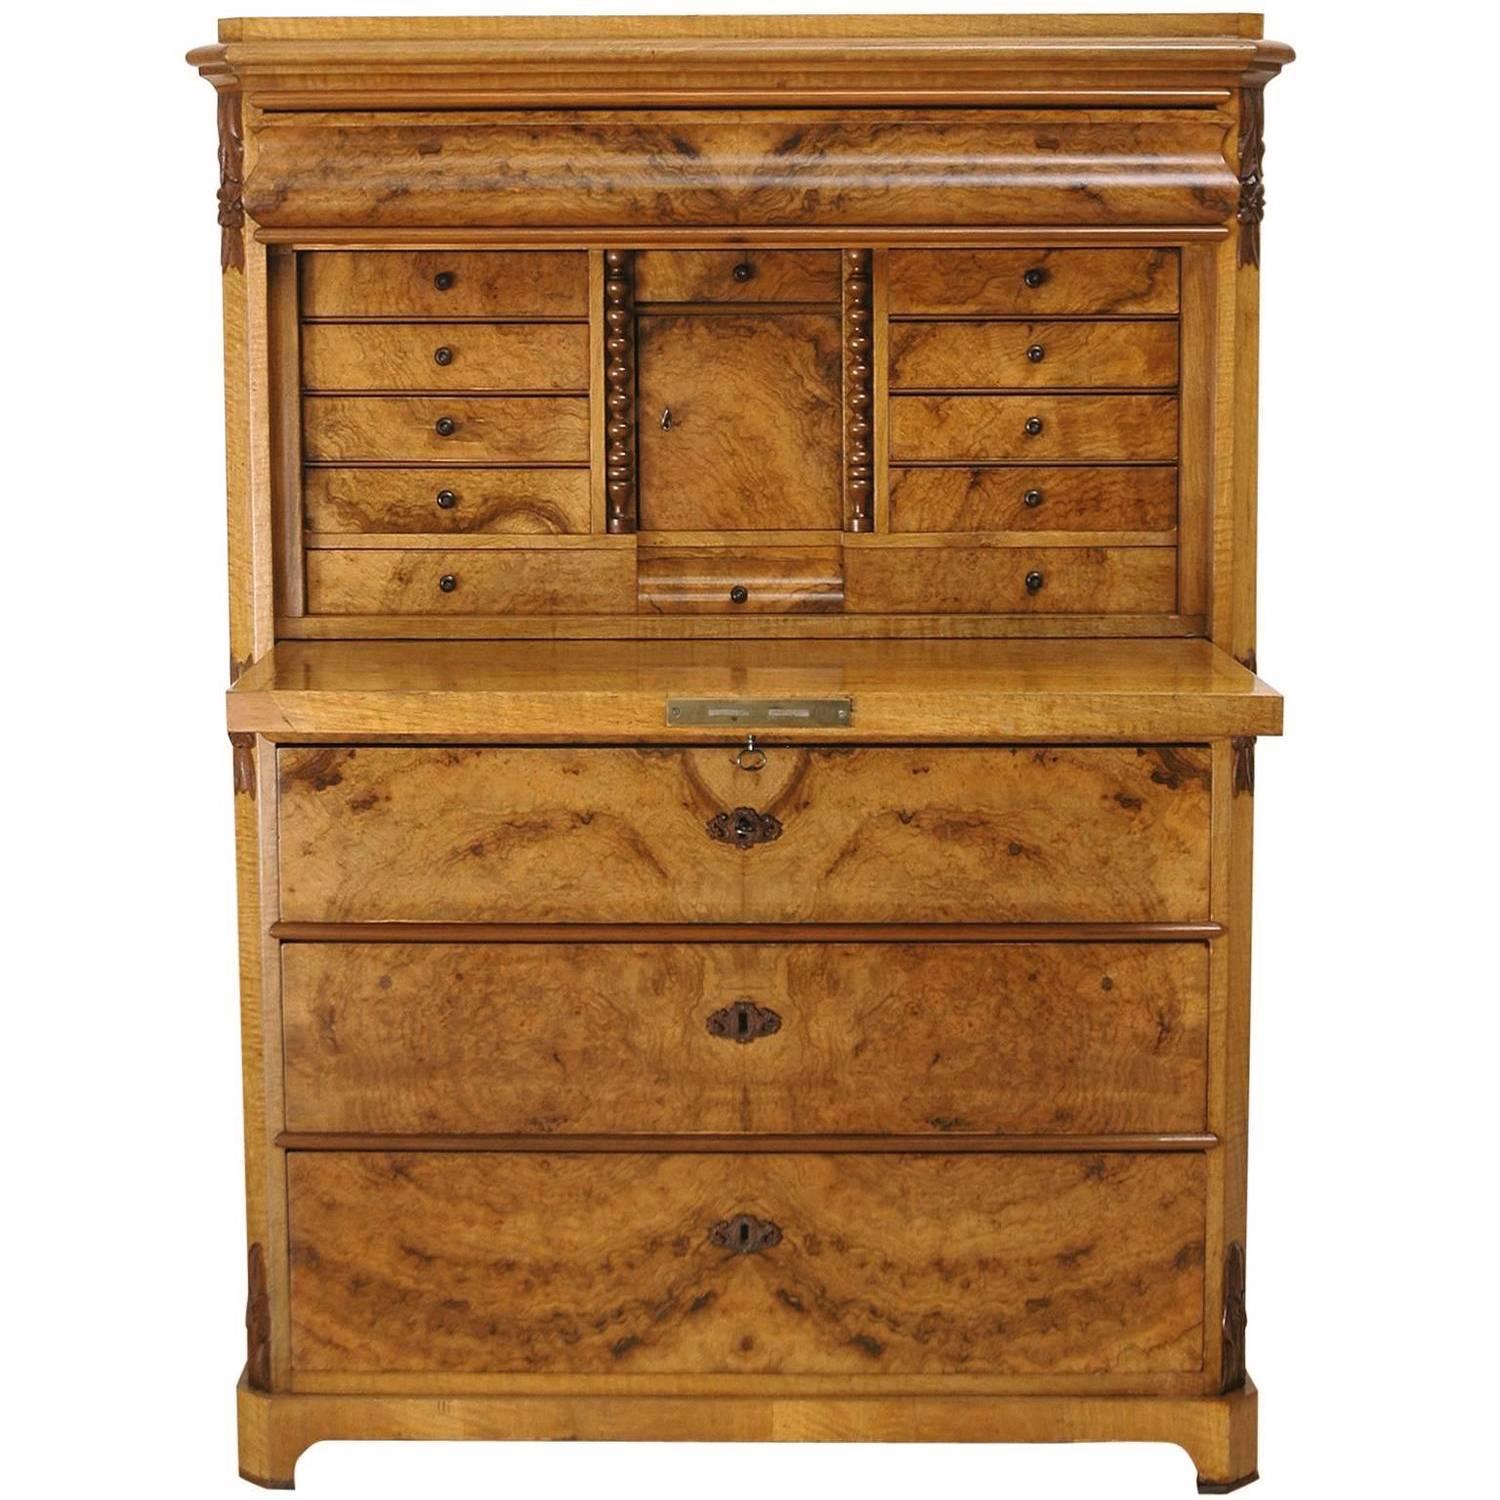 A handsome fall-front secretary in quilted and burled walnut with figured walnut, book-matched veneers. The subdued design is interrupted with small embellishments which include rope-turned columns flanking the interior desk cubby and carved